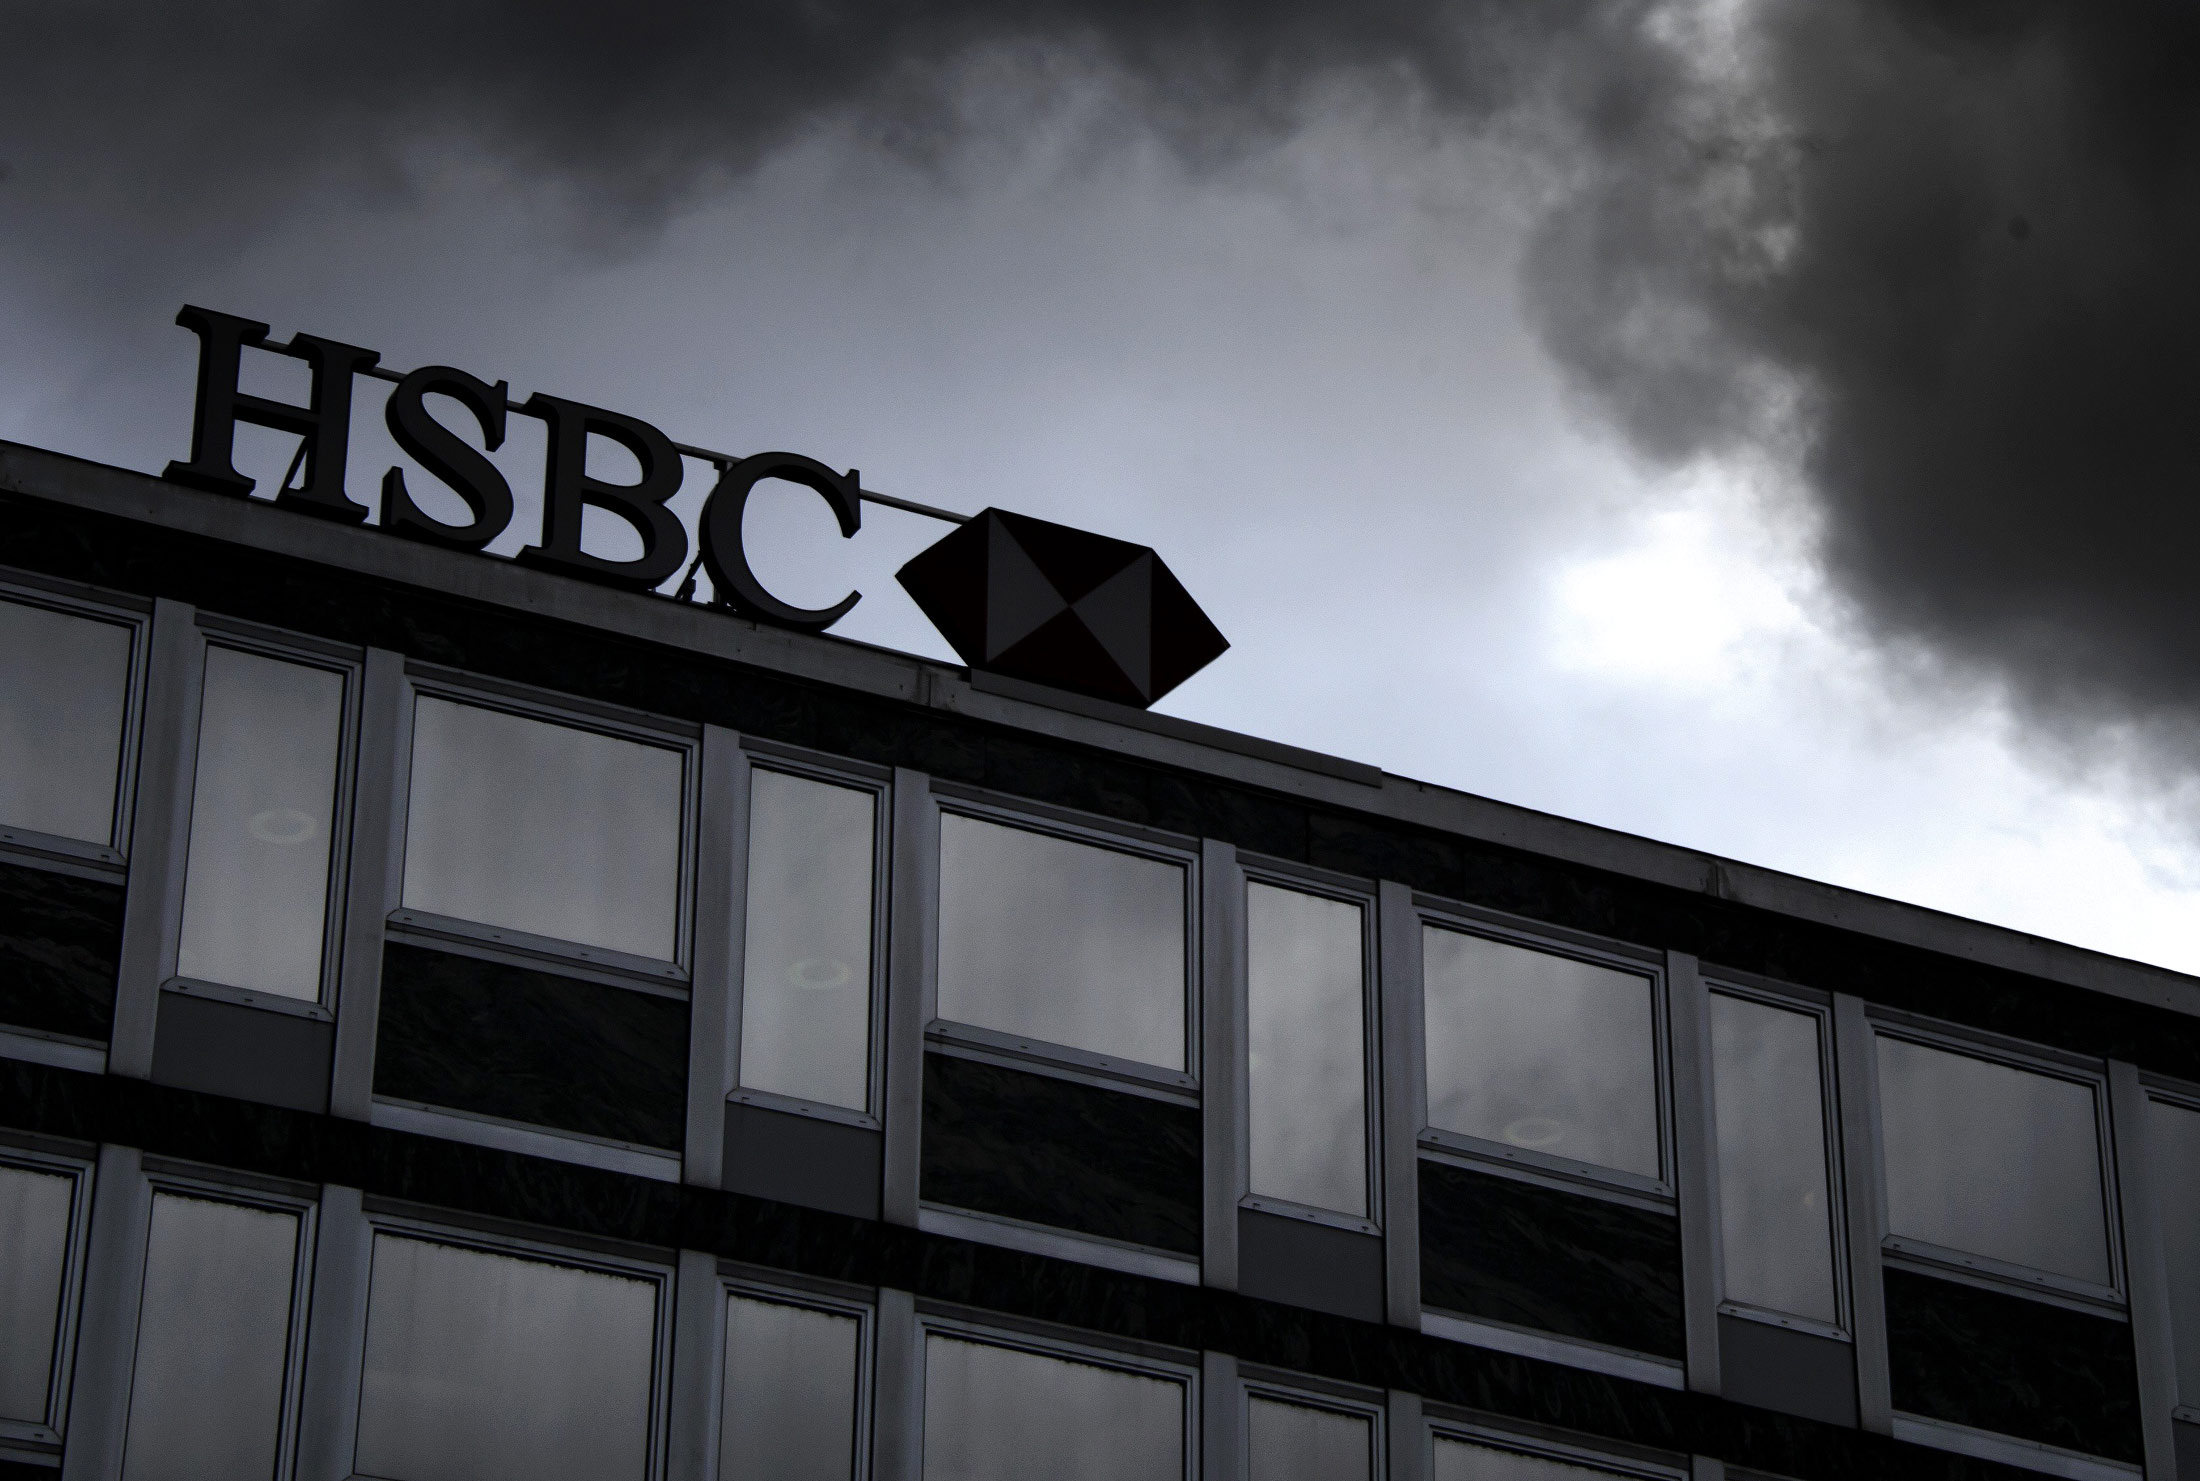 HSBC private banking is Geneva. (Suisse) is seen on June 14, 2013 in the center of Geneva.
